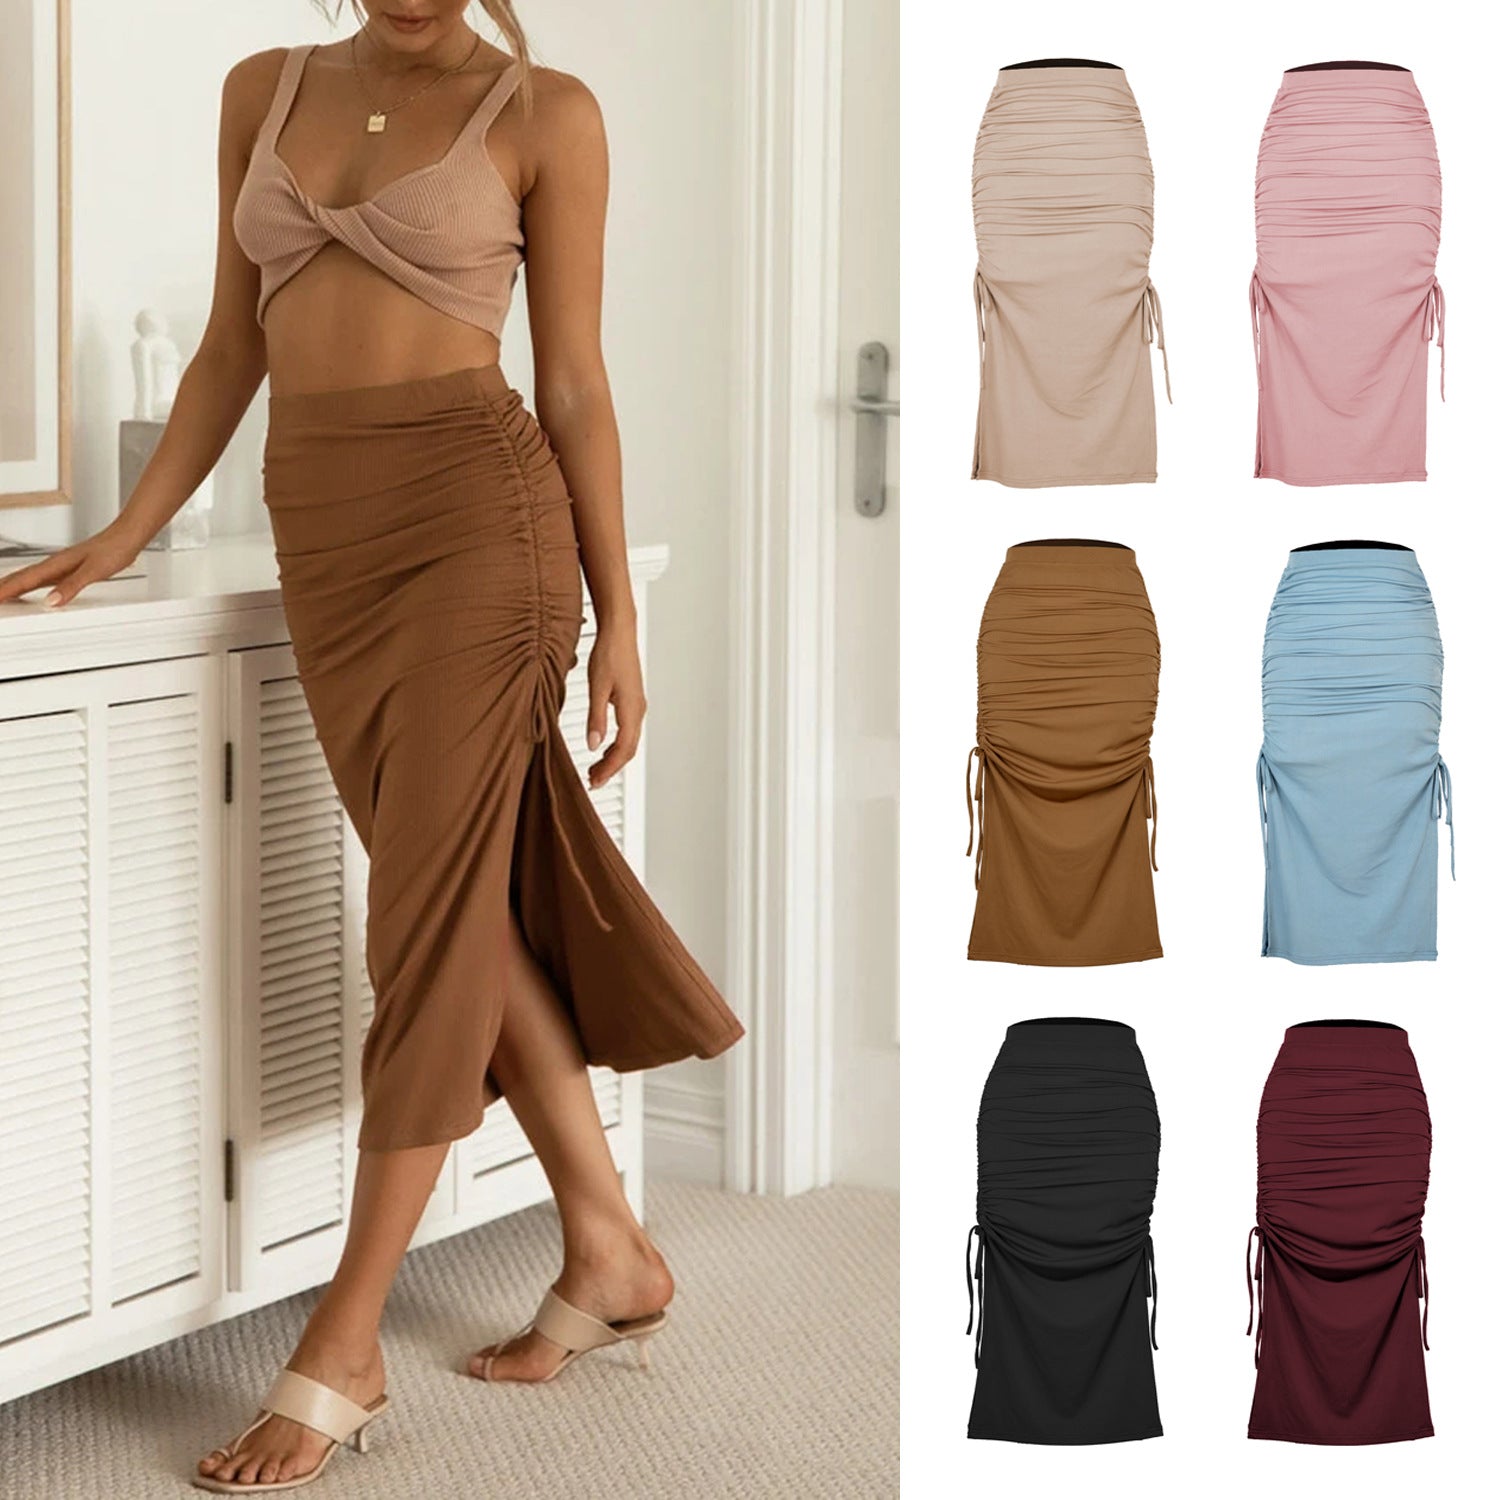 Women's Knitted Slim Fashion Pleated Tie Sexy Skirts